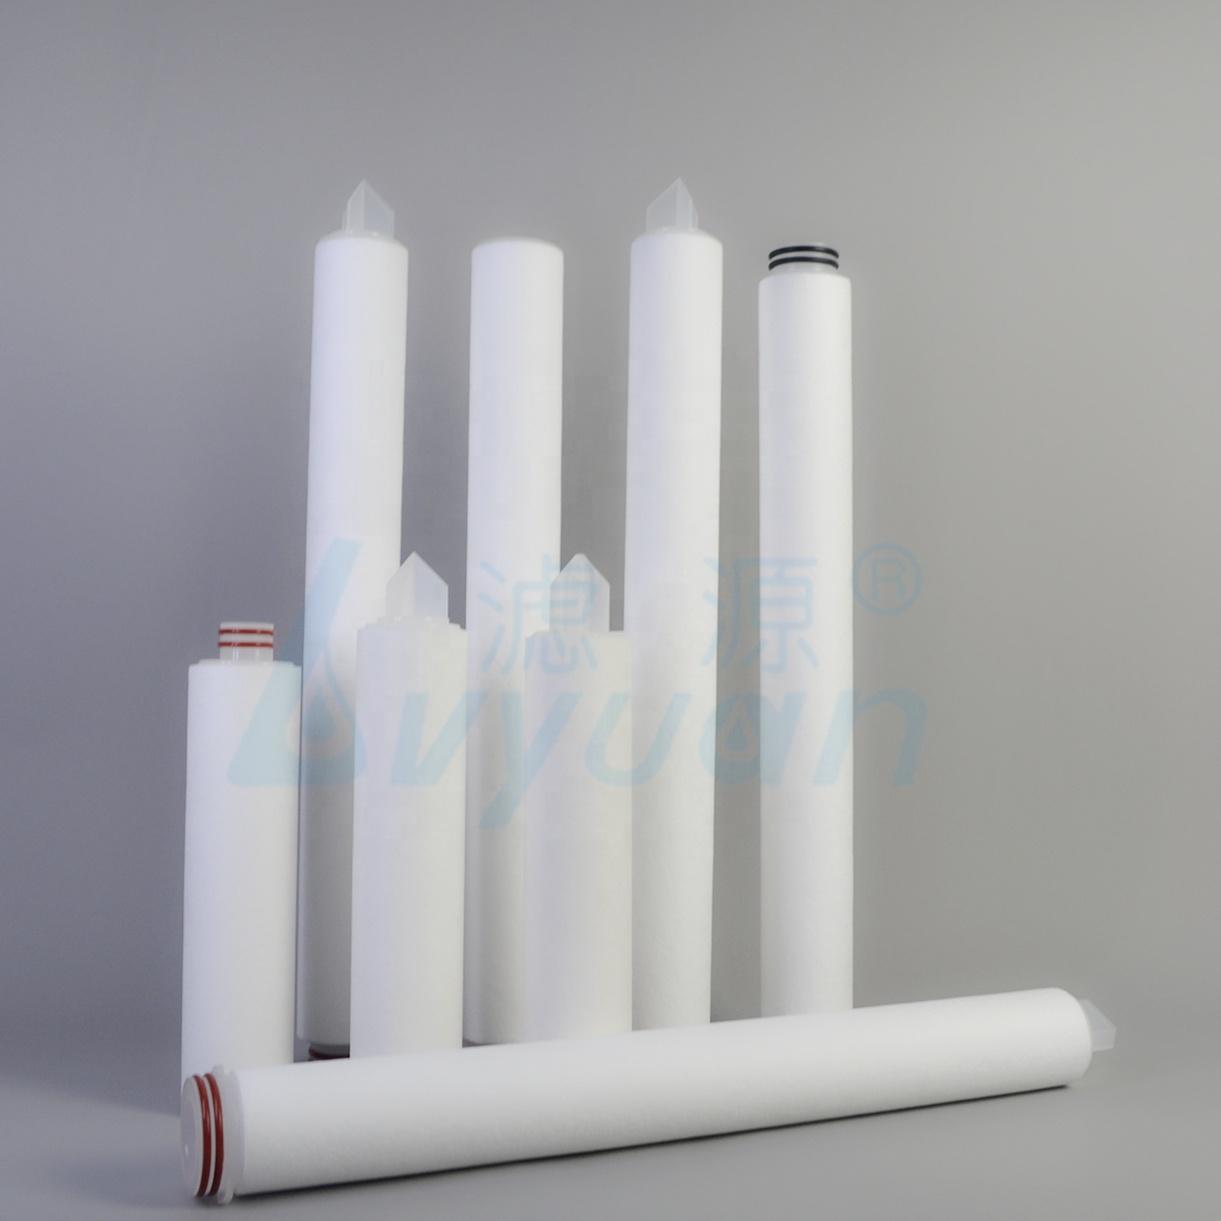 20 Inch Water Filter Cartridge PP Filter for Water Filtration